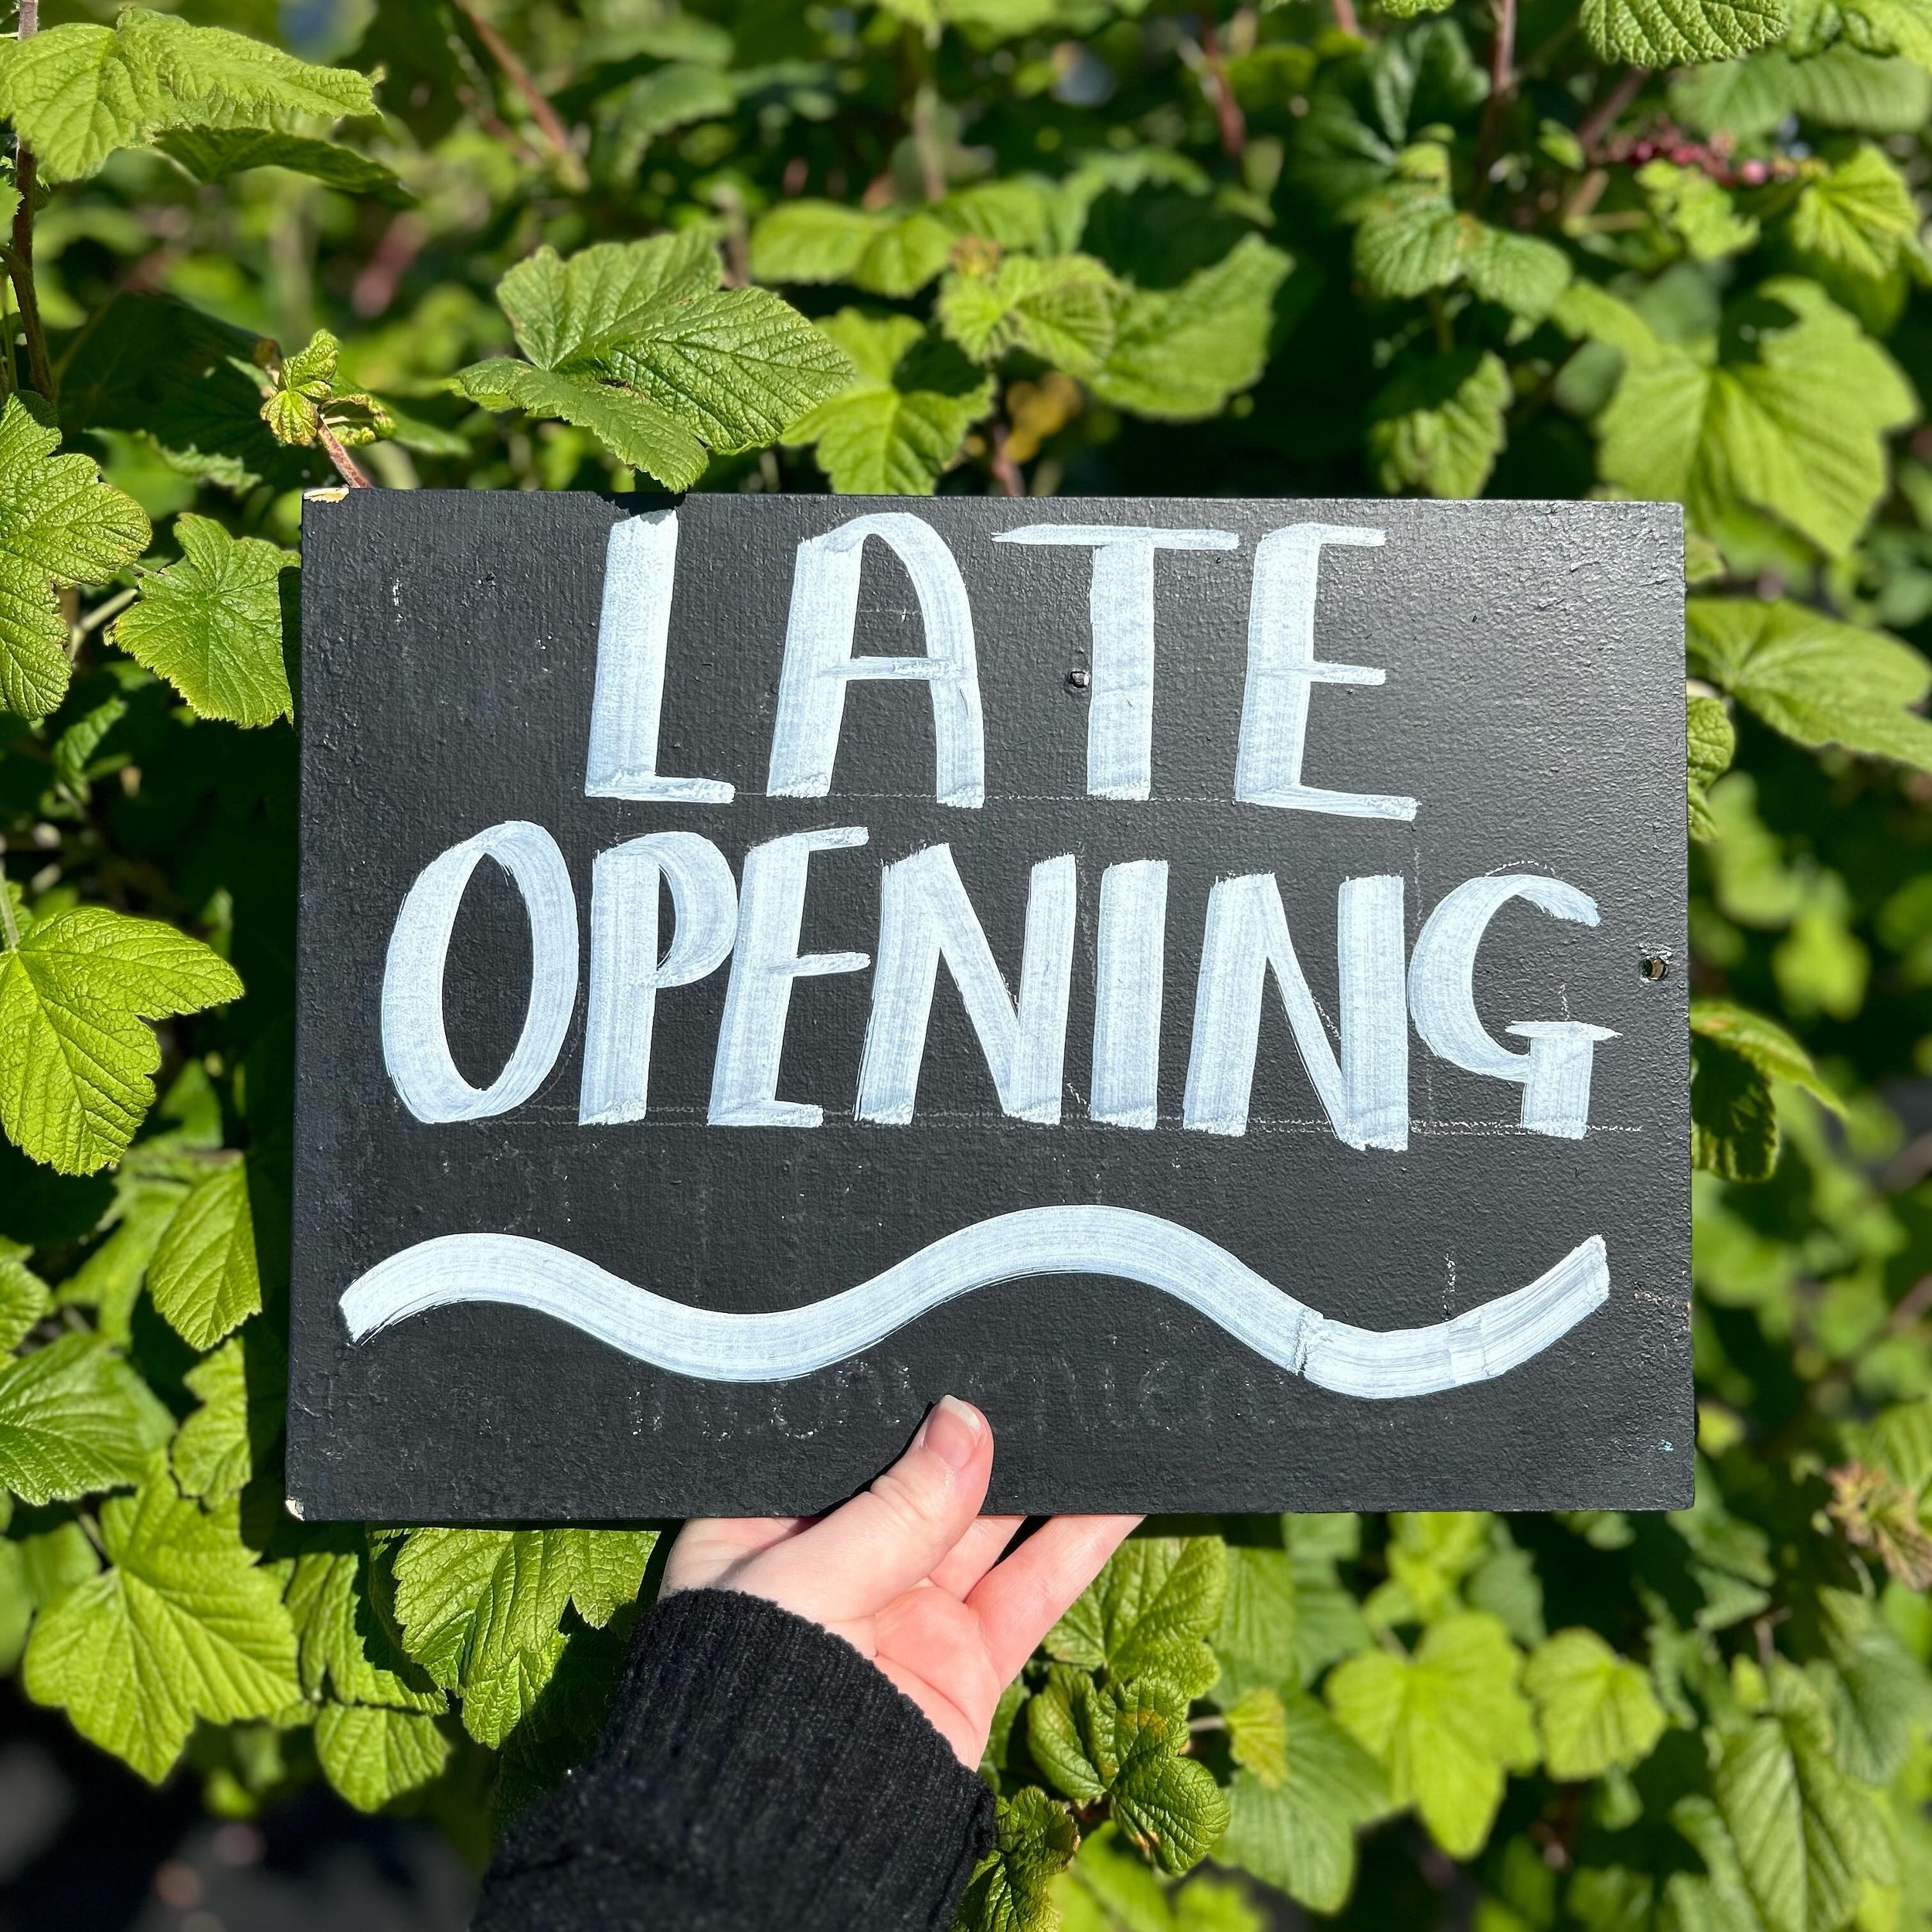 Late opening⏰

Just so you all know, our Englefield, Hungerford and Winchester farm shops will be opening at a later time of 12 pm on Monday 29th April due to our annual stock takes.

Don&rsquo;t worry, our cafes will still open at the usual time of 